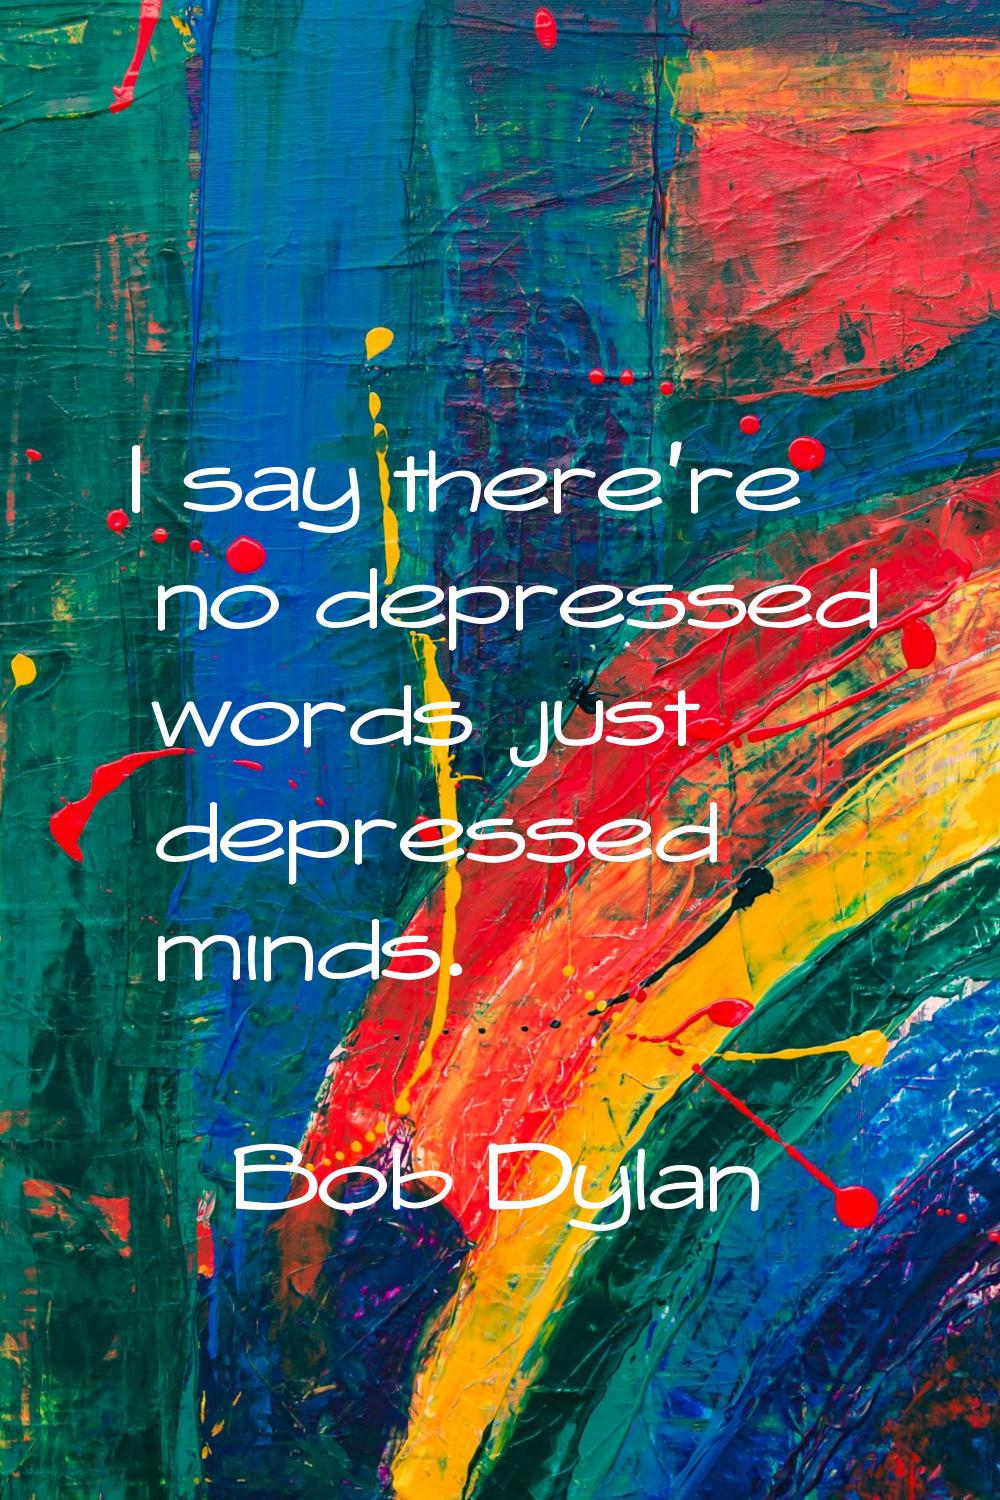 I say there're no depressed words just depressed minds.